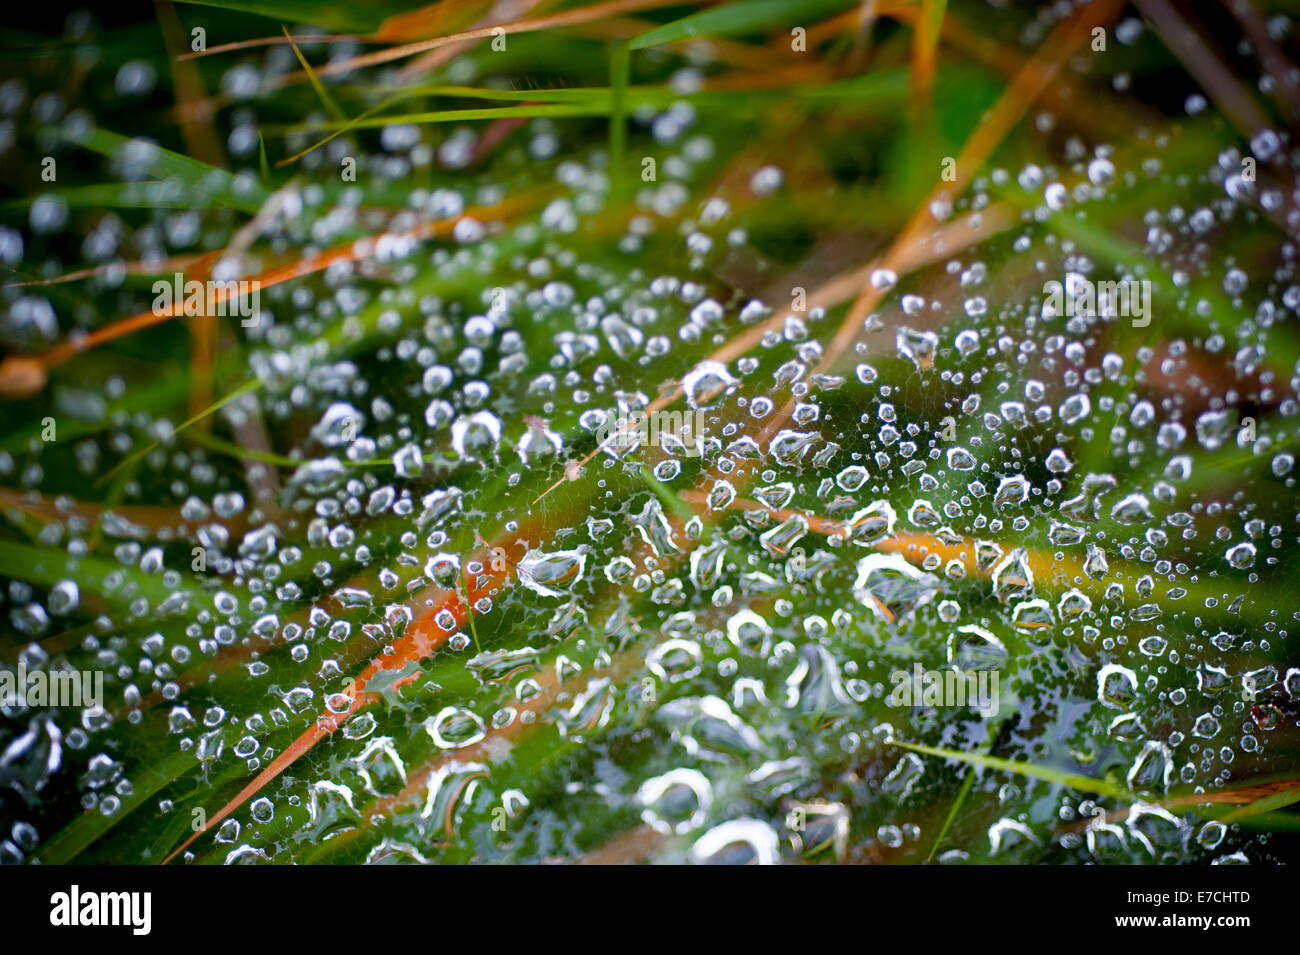 Raindrops_collect_on_a_spider_web_on_bla